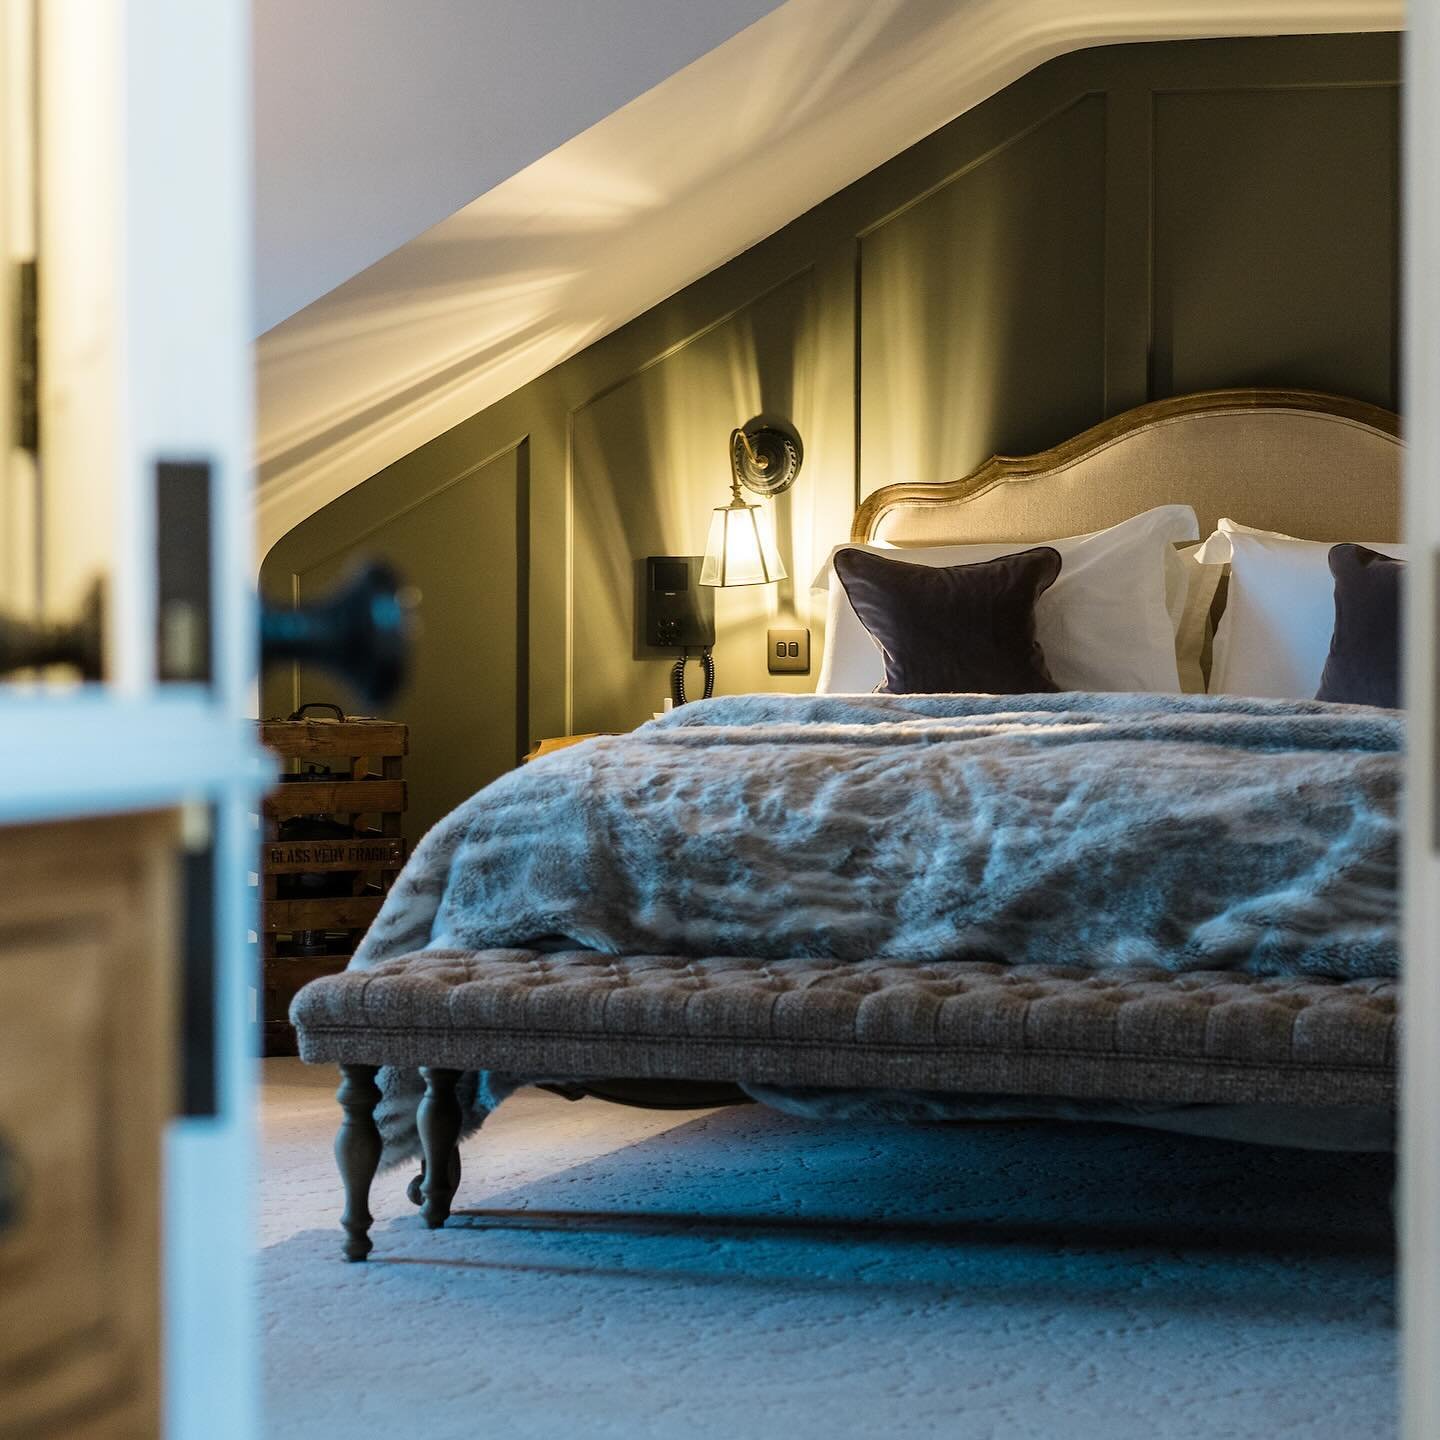 For when luxury isn&rsquo;t enough, the suites and rooms at Regency House provide the ultimate haven for a cosy getaway.
&nbsp;
Each of our suites and rooms are individually designed, so no two are alike.
&nbsp;
Take a look at our website to choose y